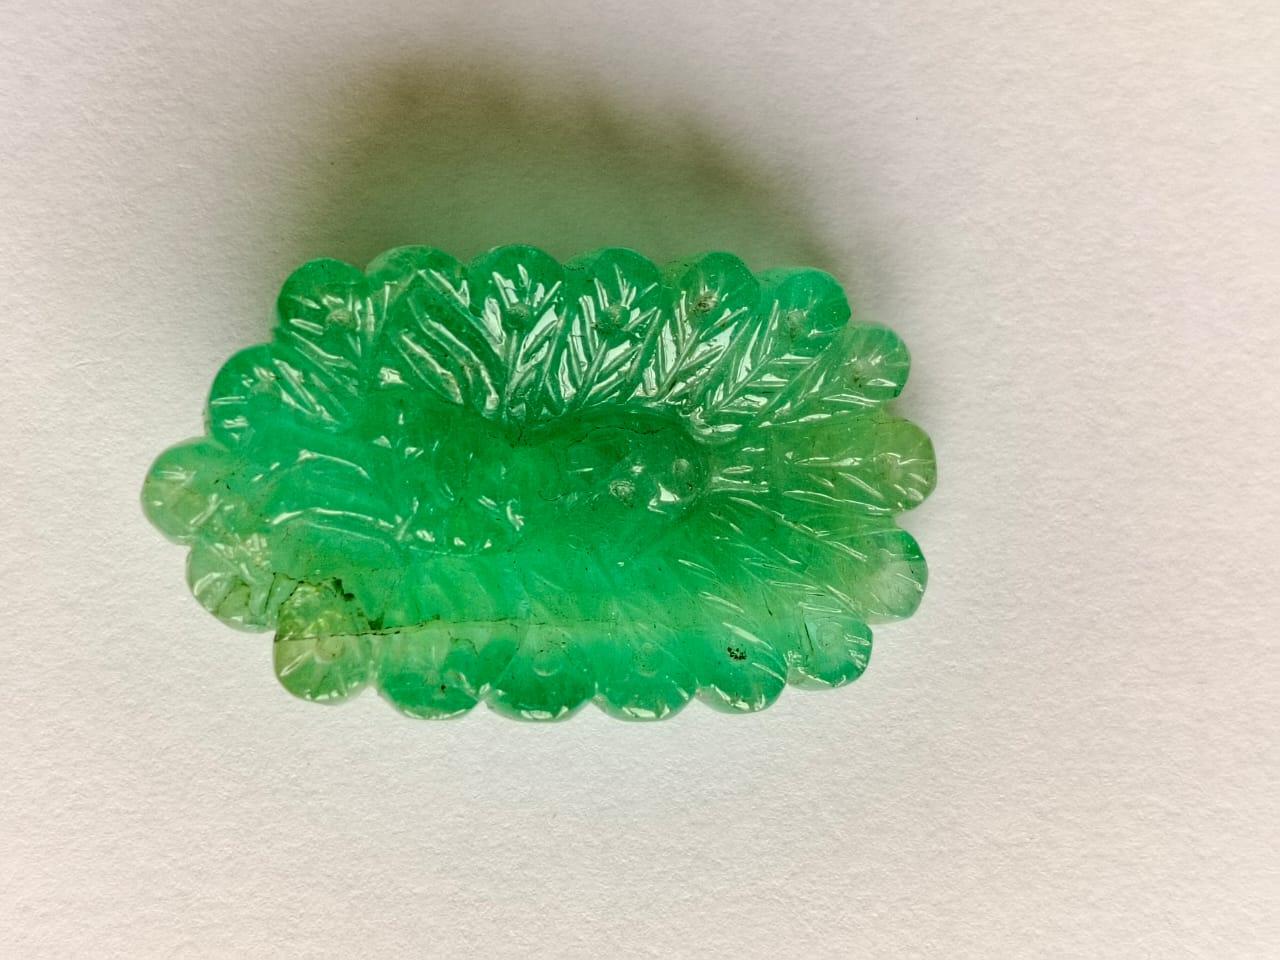 Natural Emerald Beautiful Hand Carving Peacock Gemstone.
59.41 Carat with a elegant Green color and excellent clarity. Also has an authentic fancy Peacock Carving with ideal polish to show great shine and color . It will look authentic in jewelry.